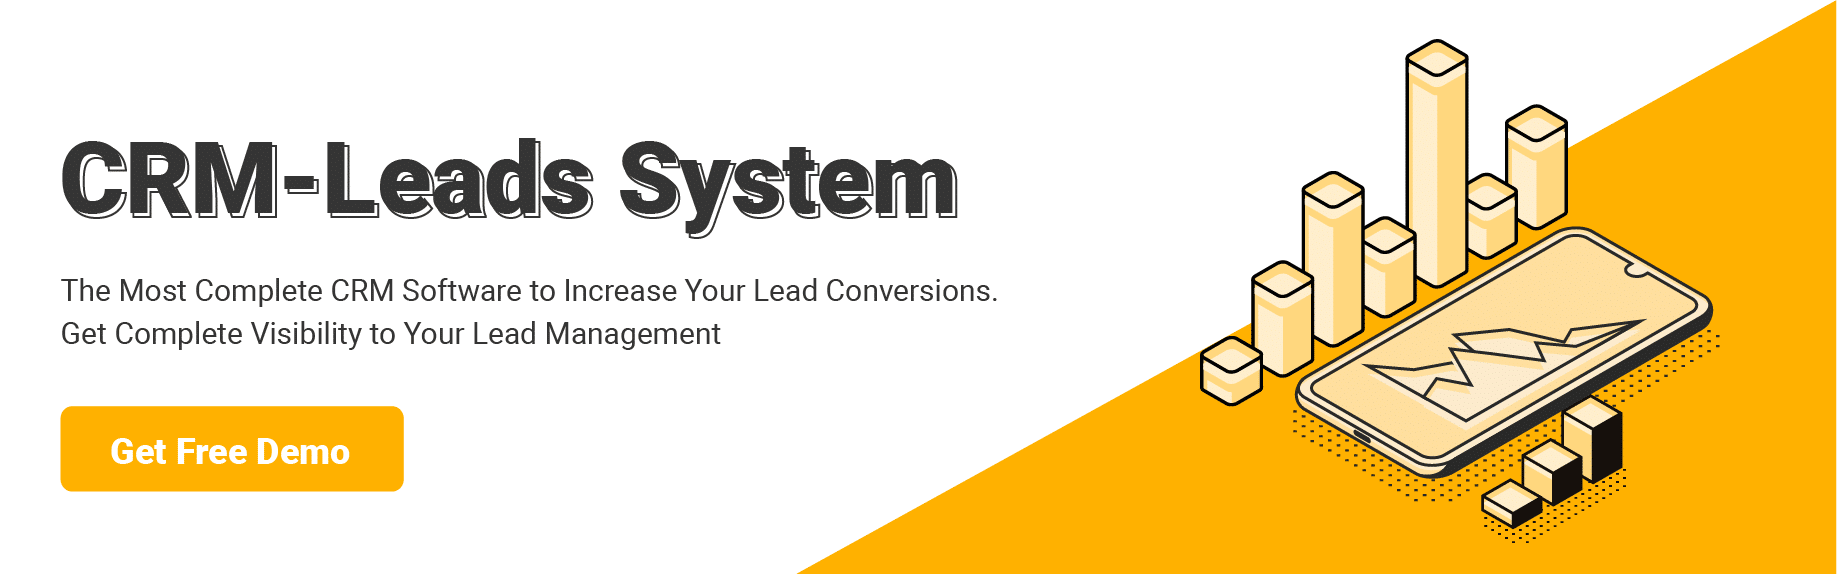 crm leads system